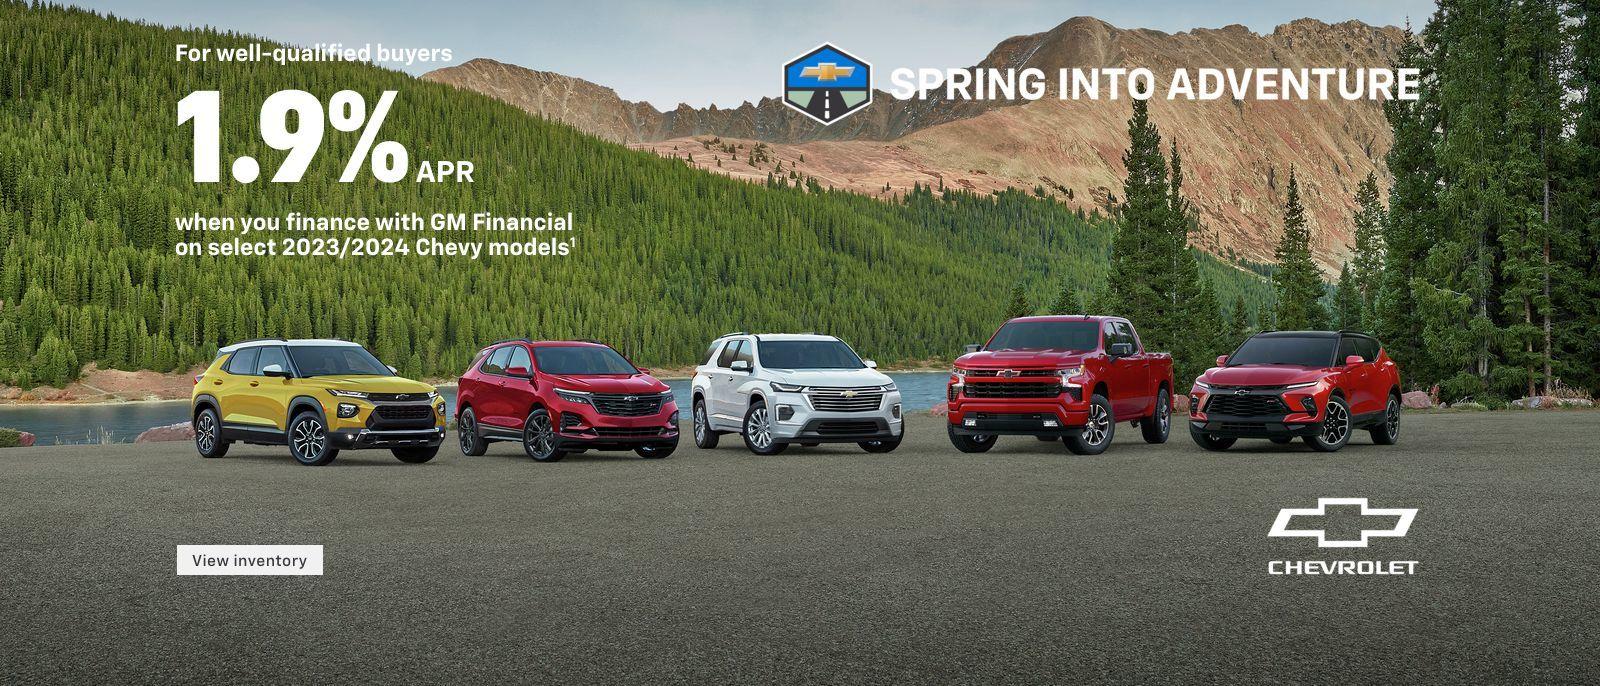 Spring into Adventure. For well-qualified buyers 1.9% APR when you finance with GM Financial on select 2023/2024 Chevy models.